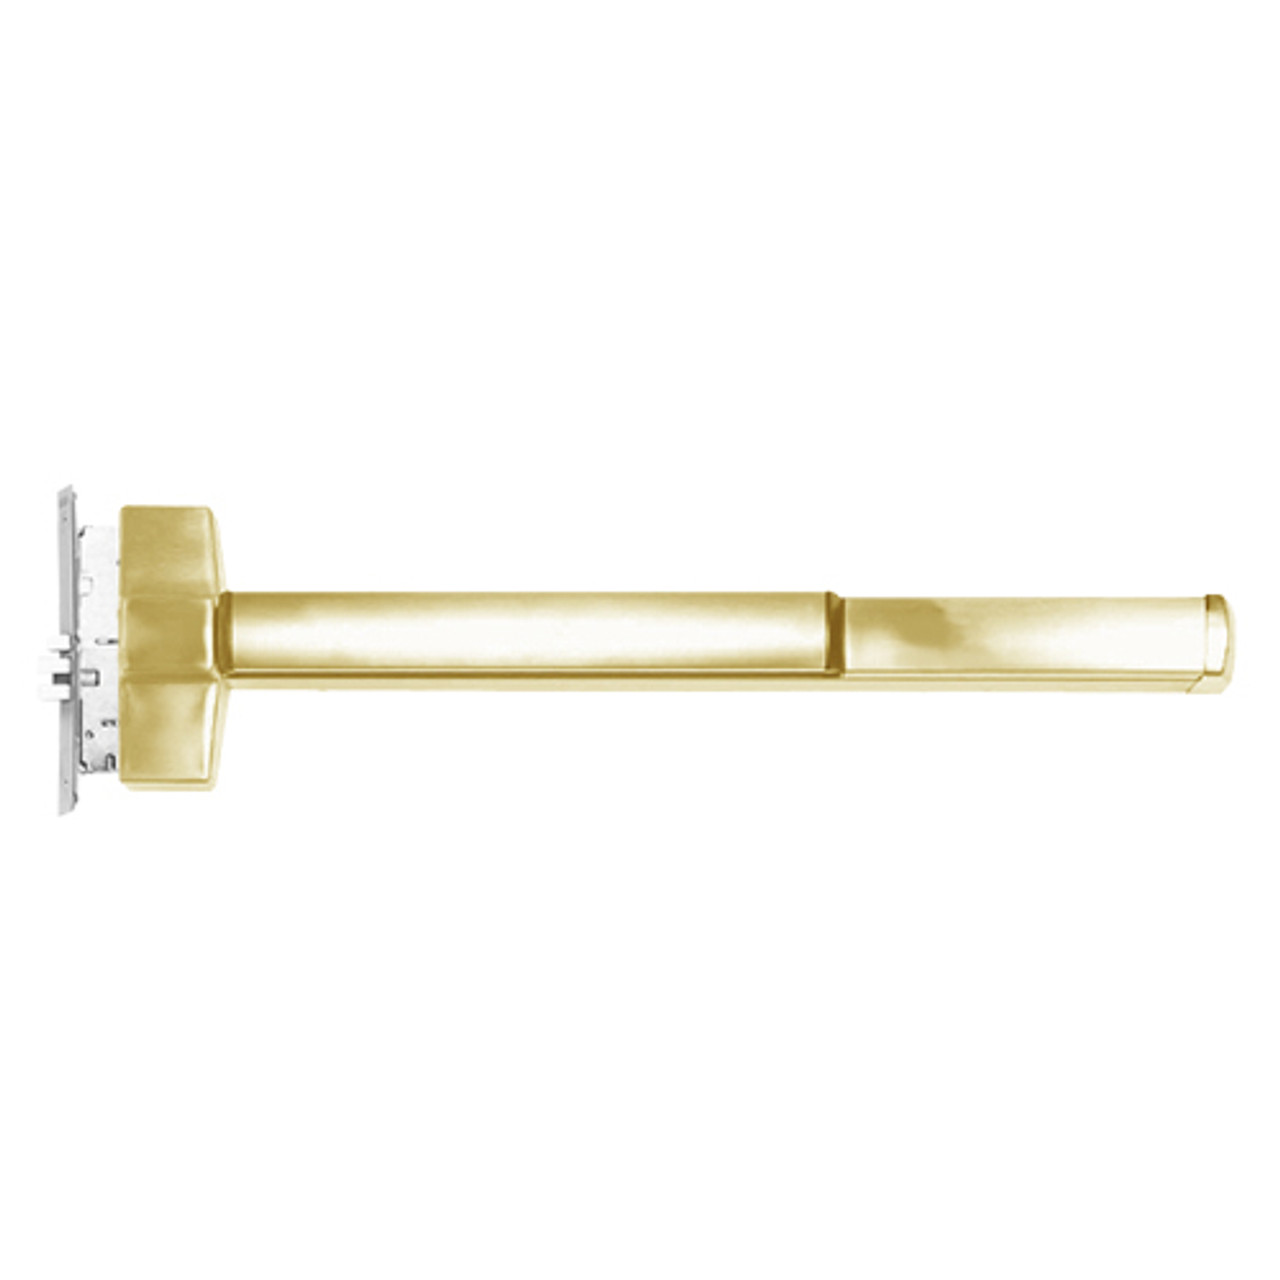 ED5657AL-606-W048-MELR-M92-LHR Corbin ED5600 Series Fire Rated Mortise Exit Device with Motorized Latch Retraction and Touchbar Monitoring in Satin Brass Finish